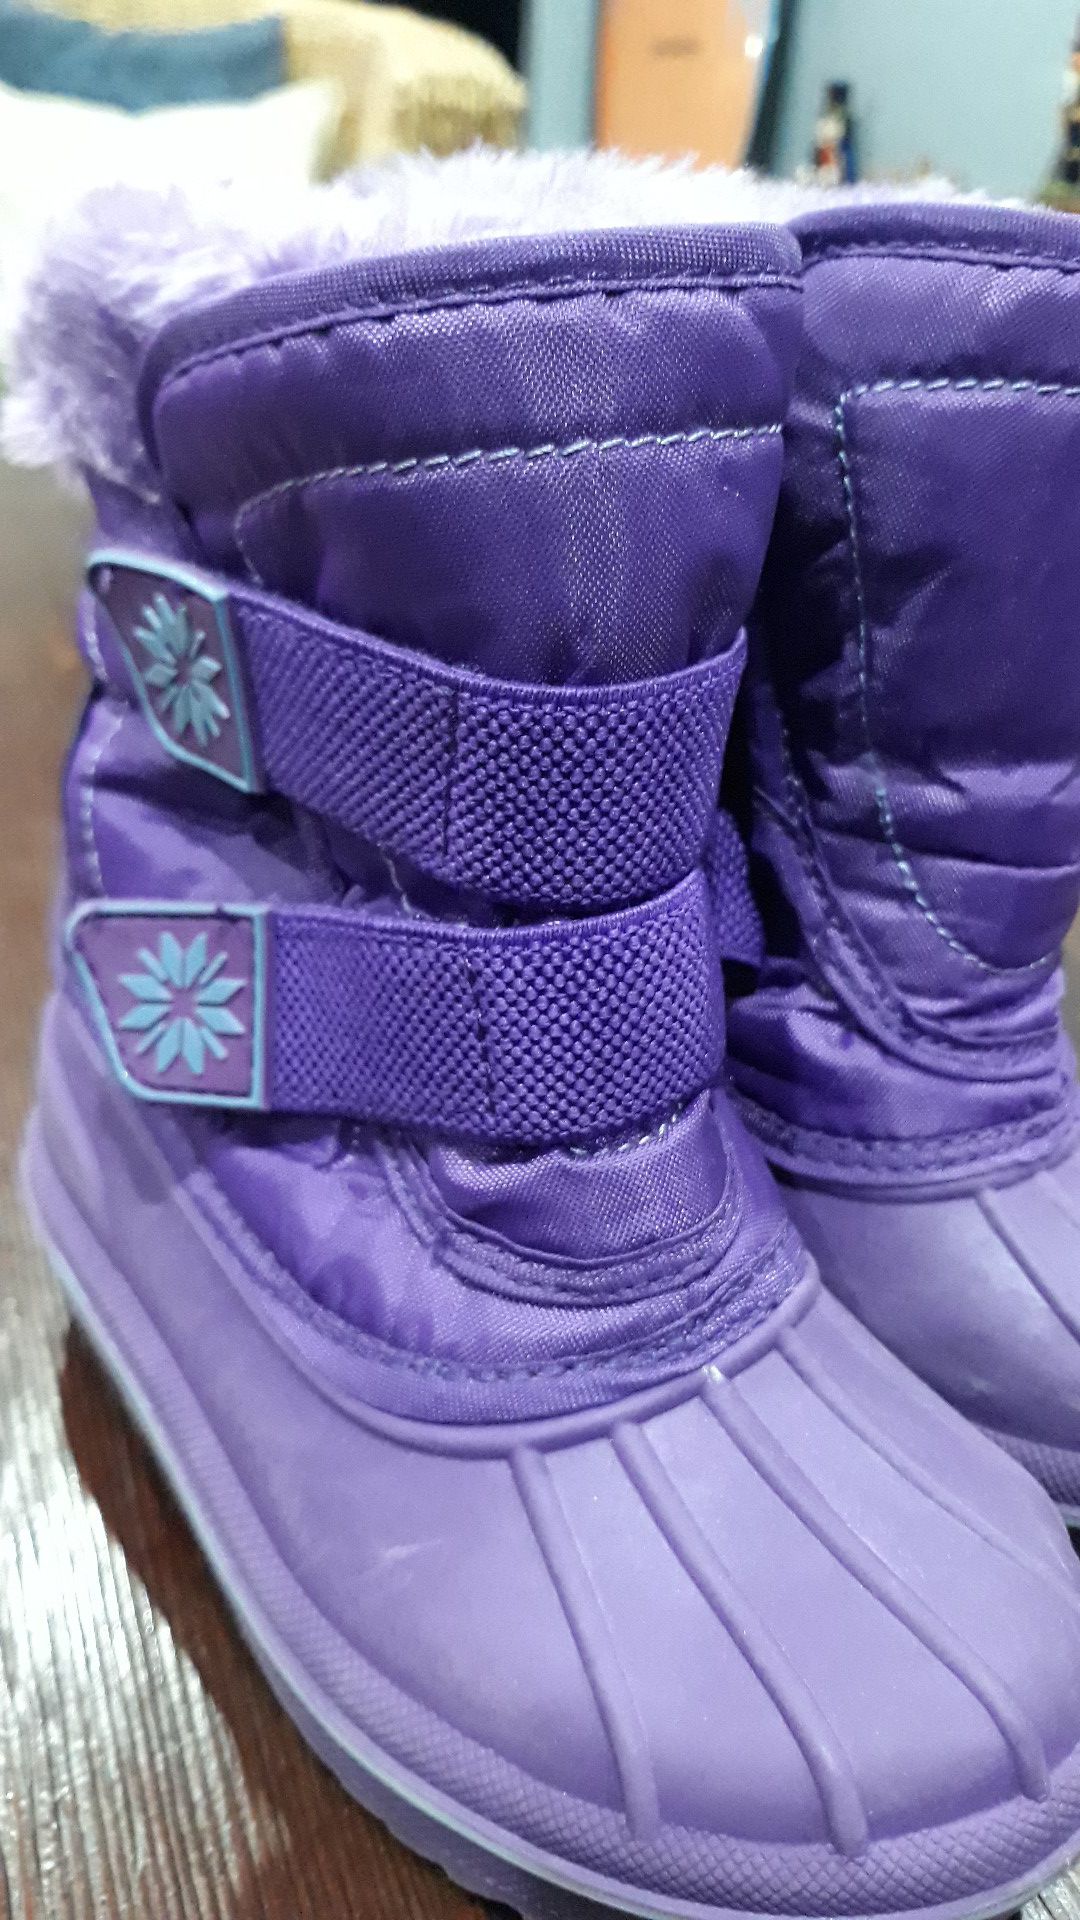 SNOW BOOTS FOR GIRLS SIZE:7/8